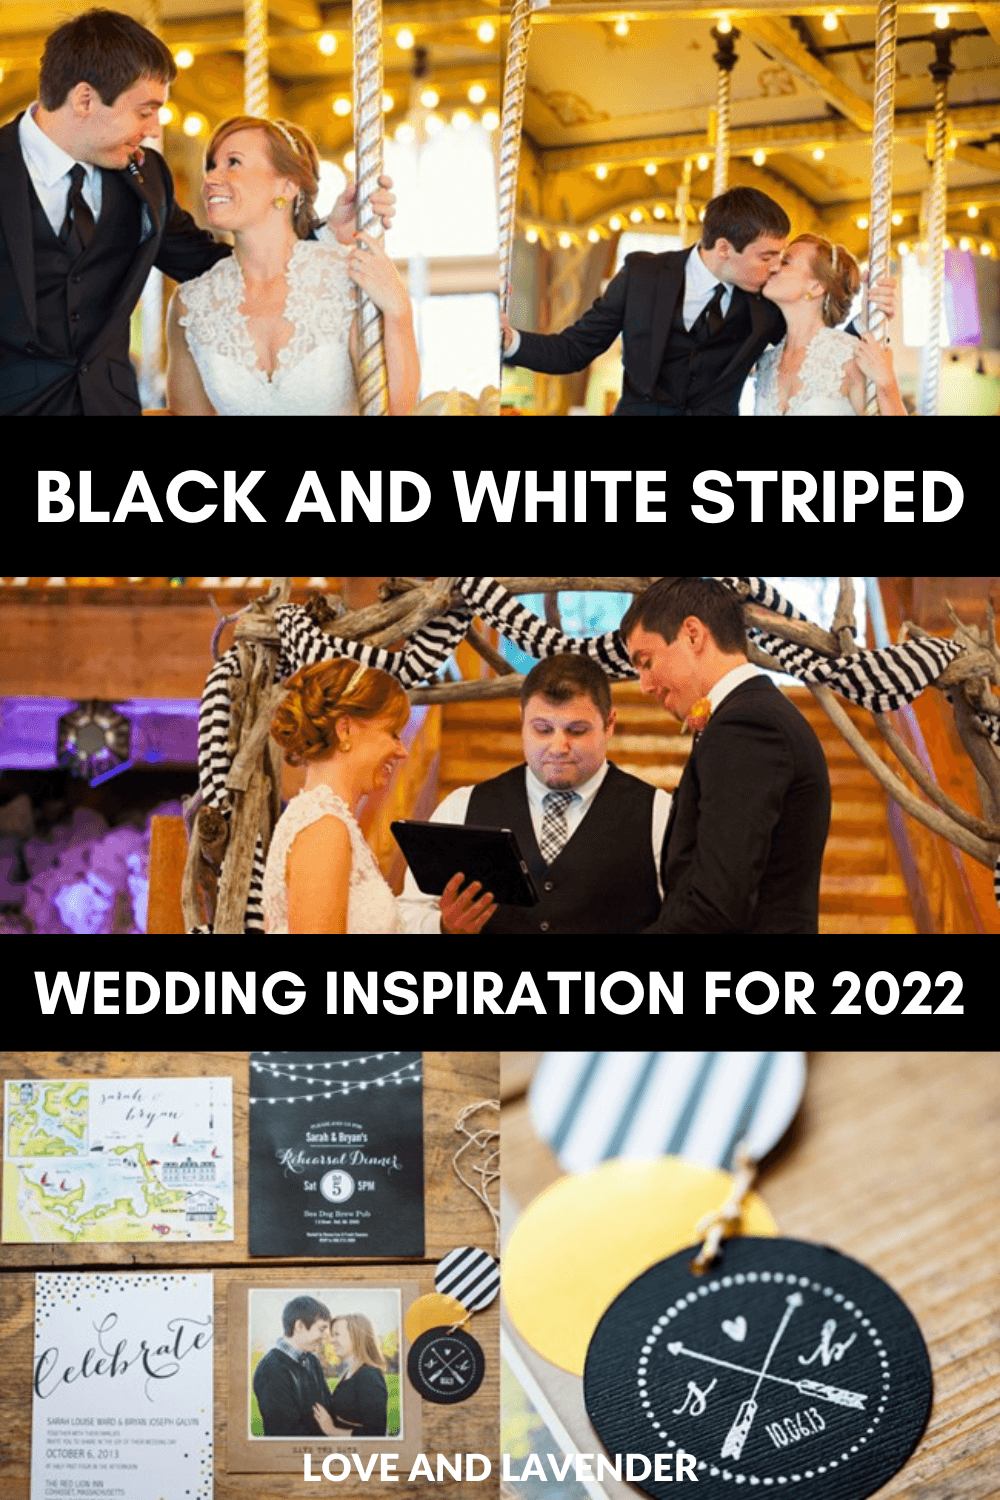 A black and white striped wedding is a powerful reminder that life goes full circle. They're stylish, elegant, and suitable for any event. Head over to the blog for some tips and ideas for a perfect black and white striped wedding.